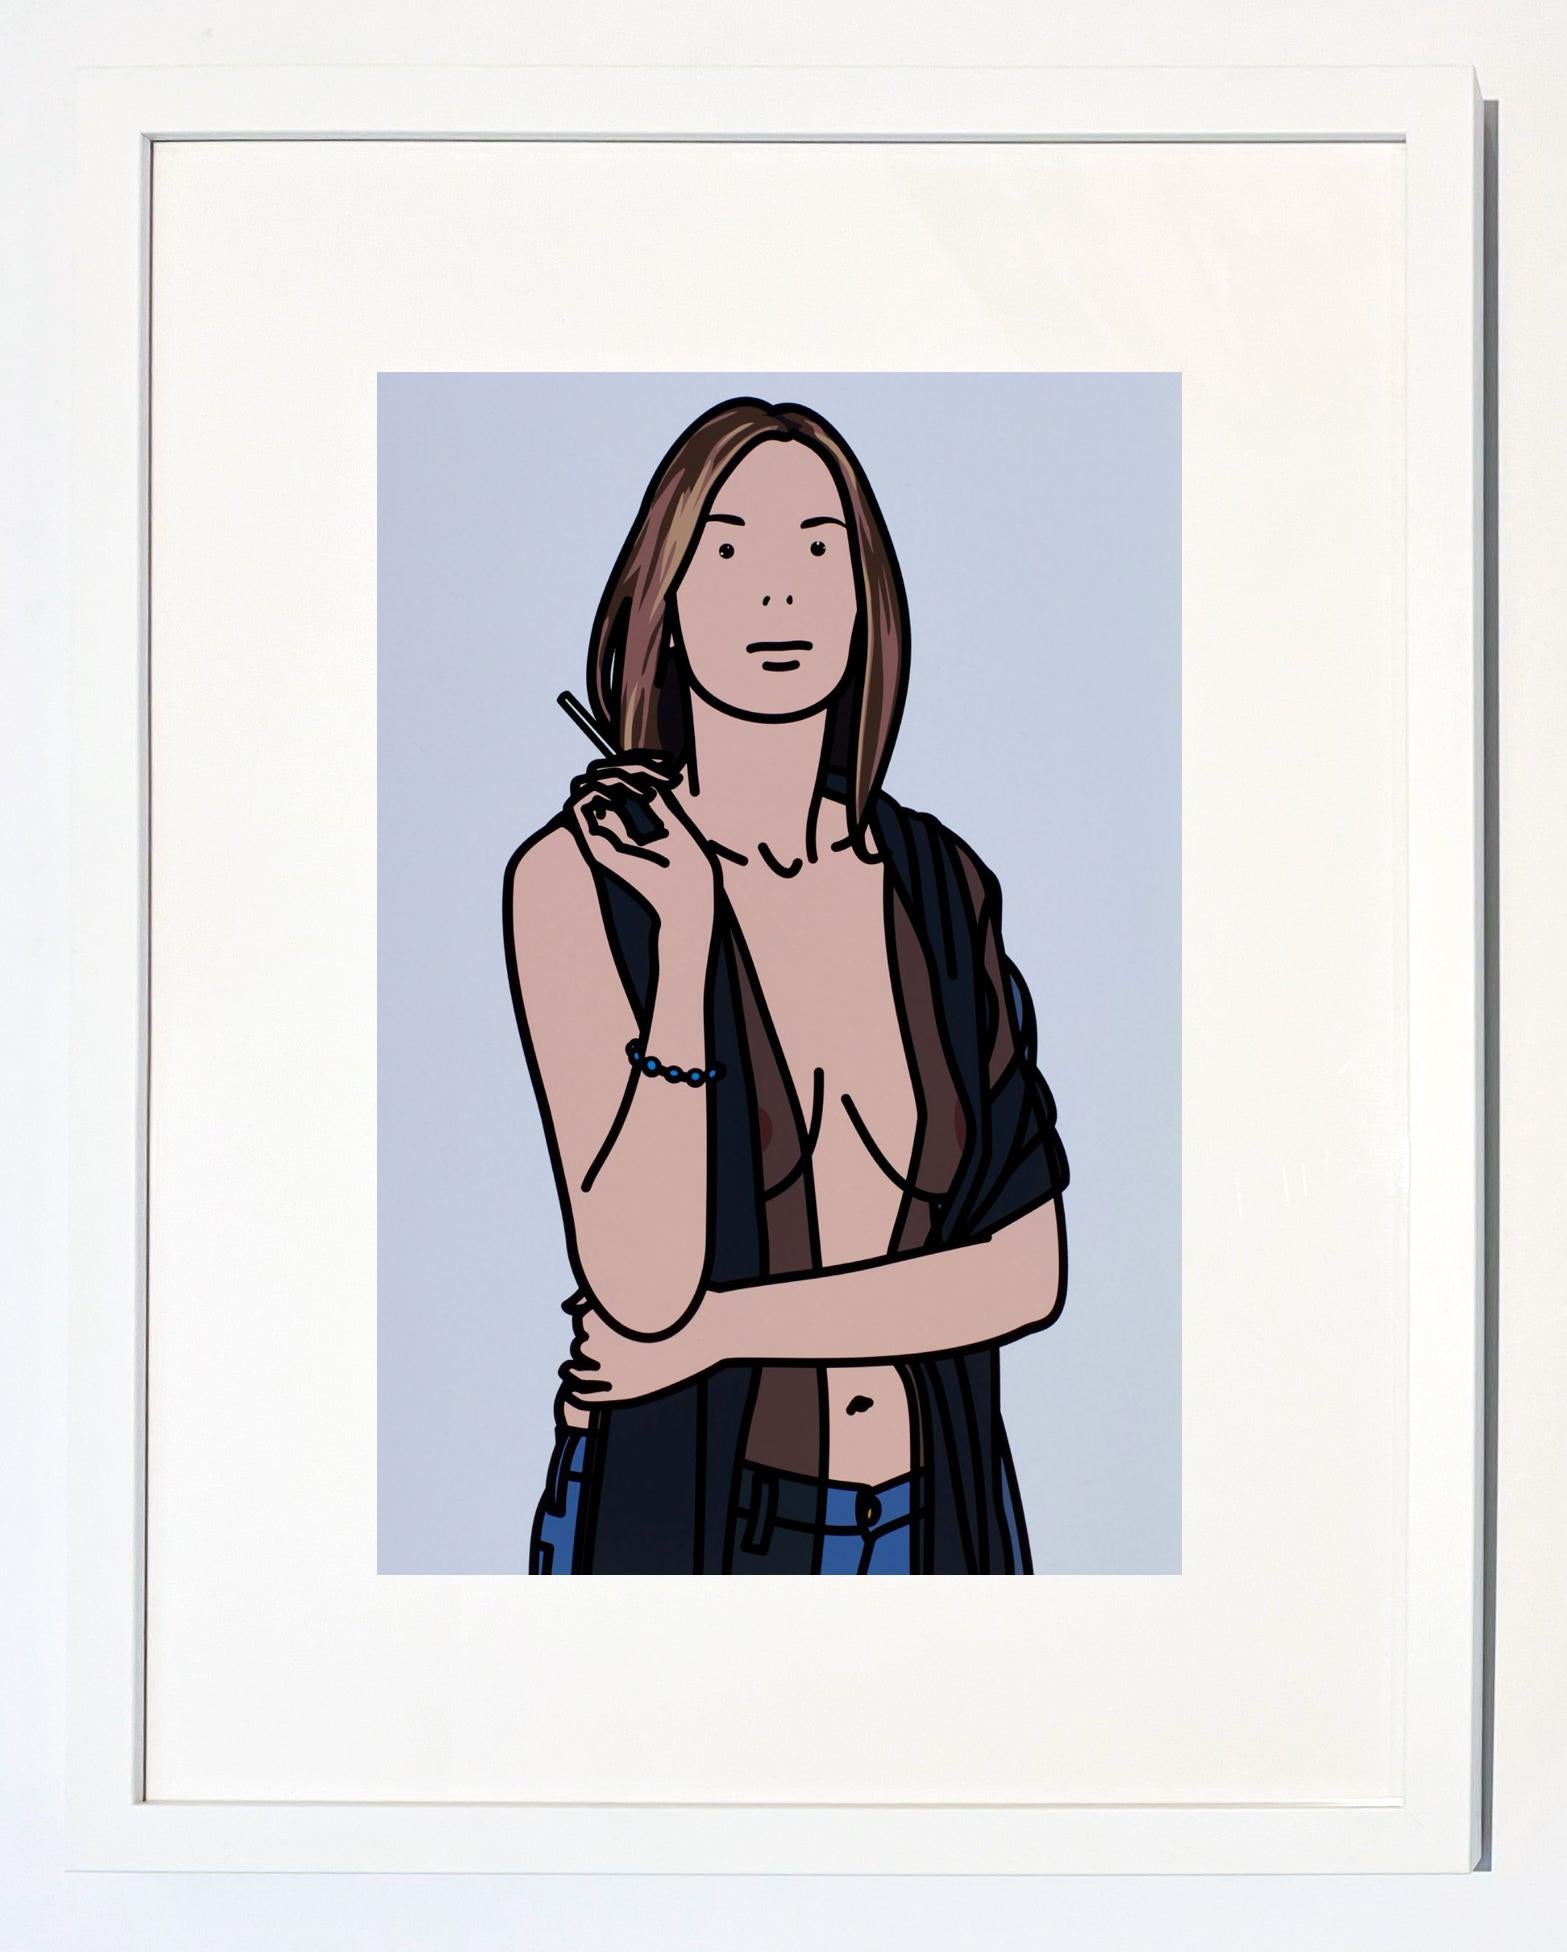 Ruth Smoking 5, from 26 Portraits - Print by Julian Opie